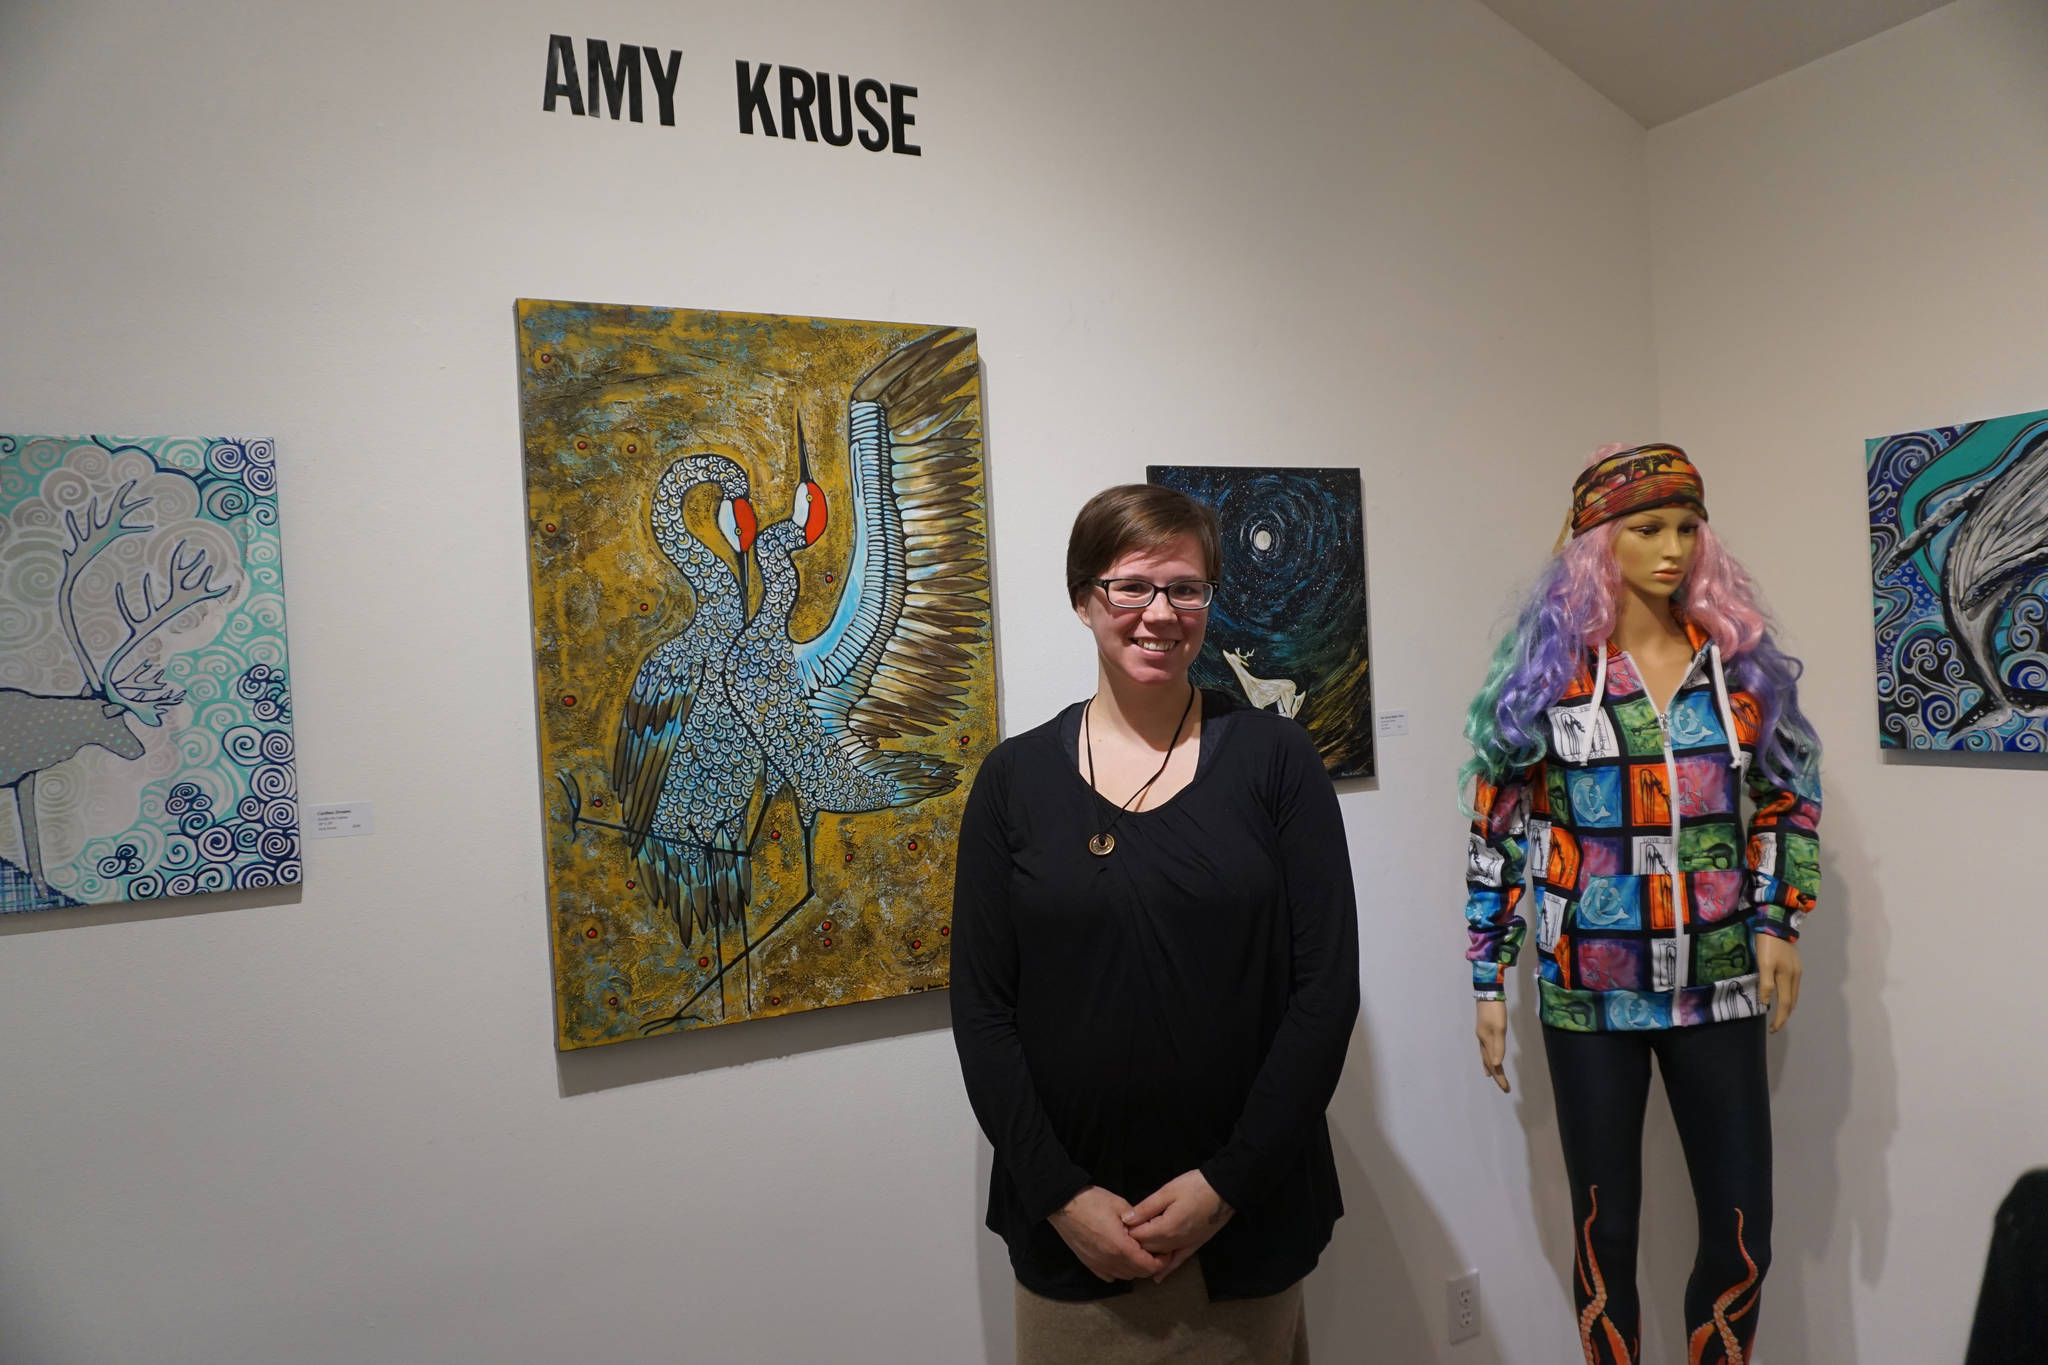 Amy Kruse poses for a photo at a First Friday reception on Dec. 1, 2017 at Fireweed Gallery in Homer, Alaska. Some of her fashion designs is on the mannequin at right. (Photo by Michael Armstrong, Homer News)